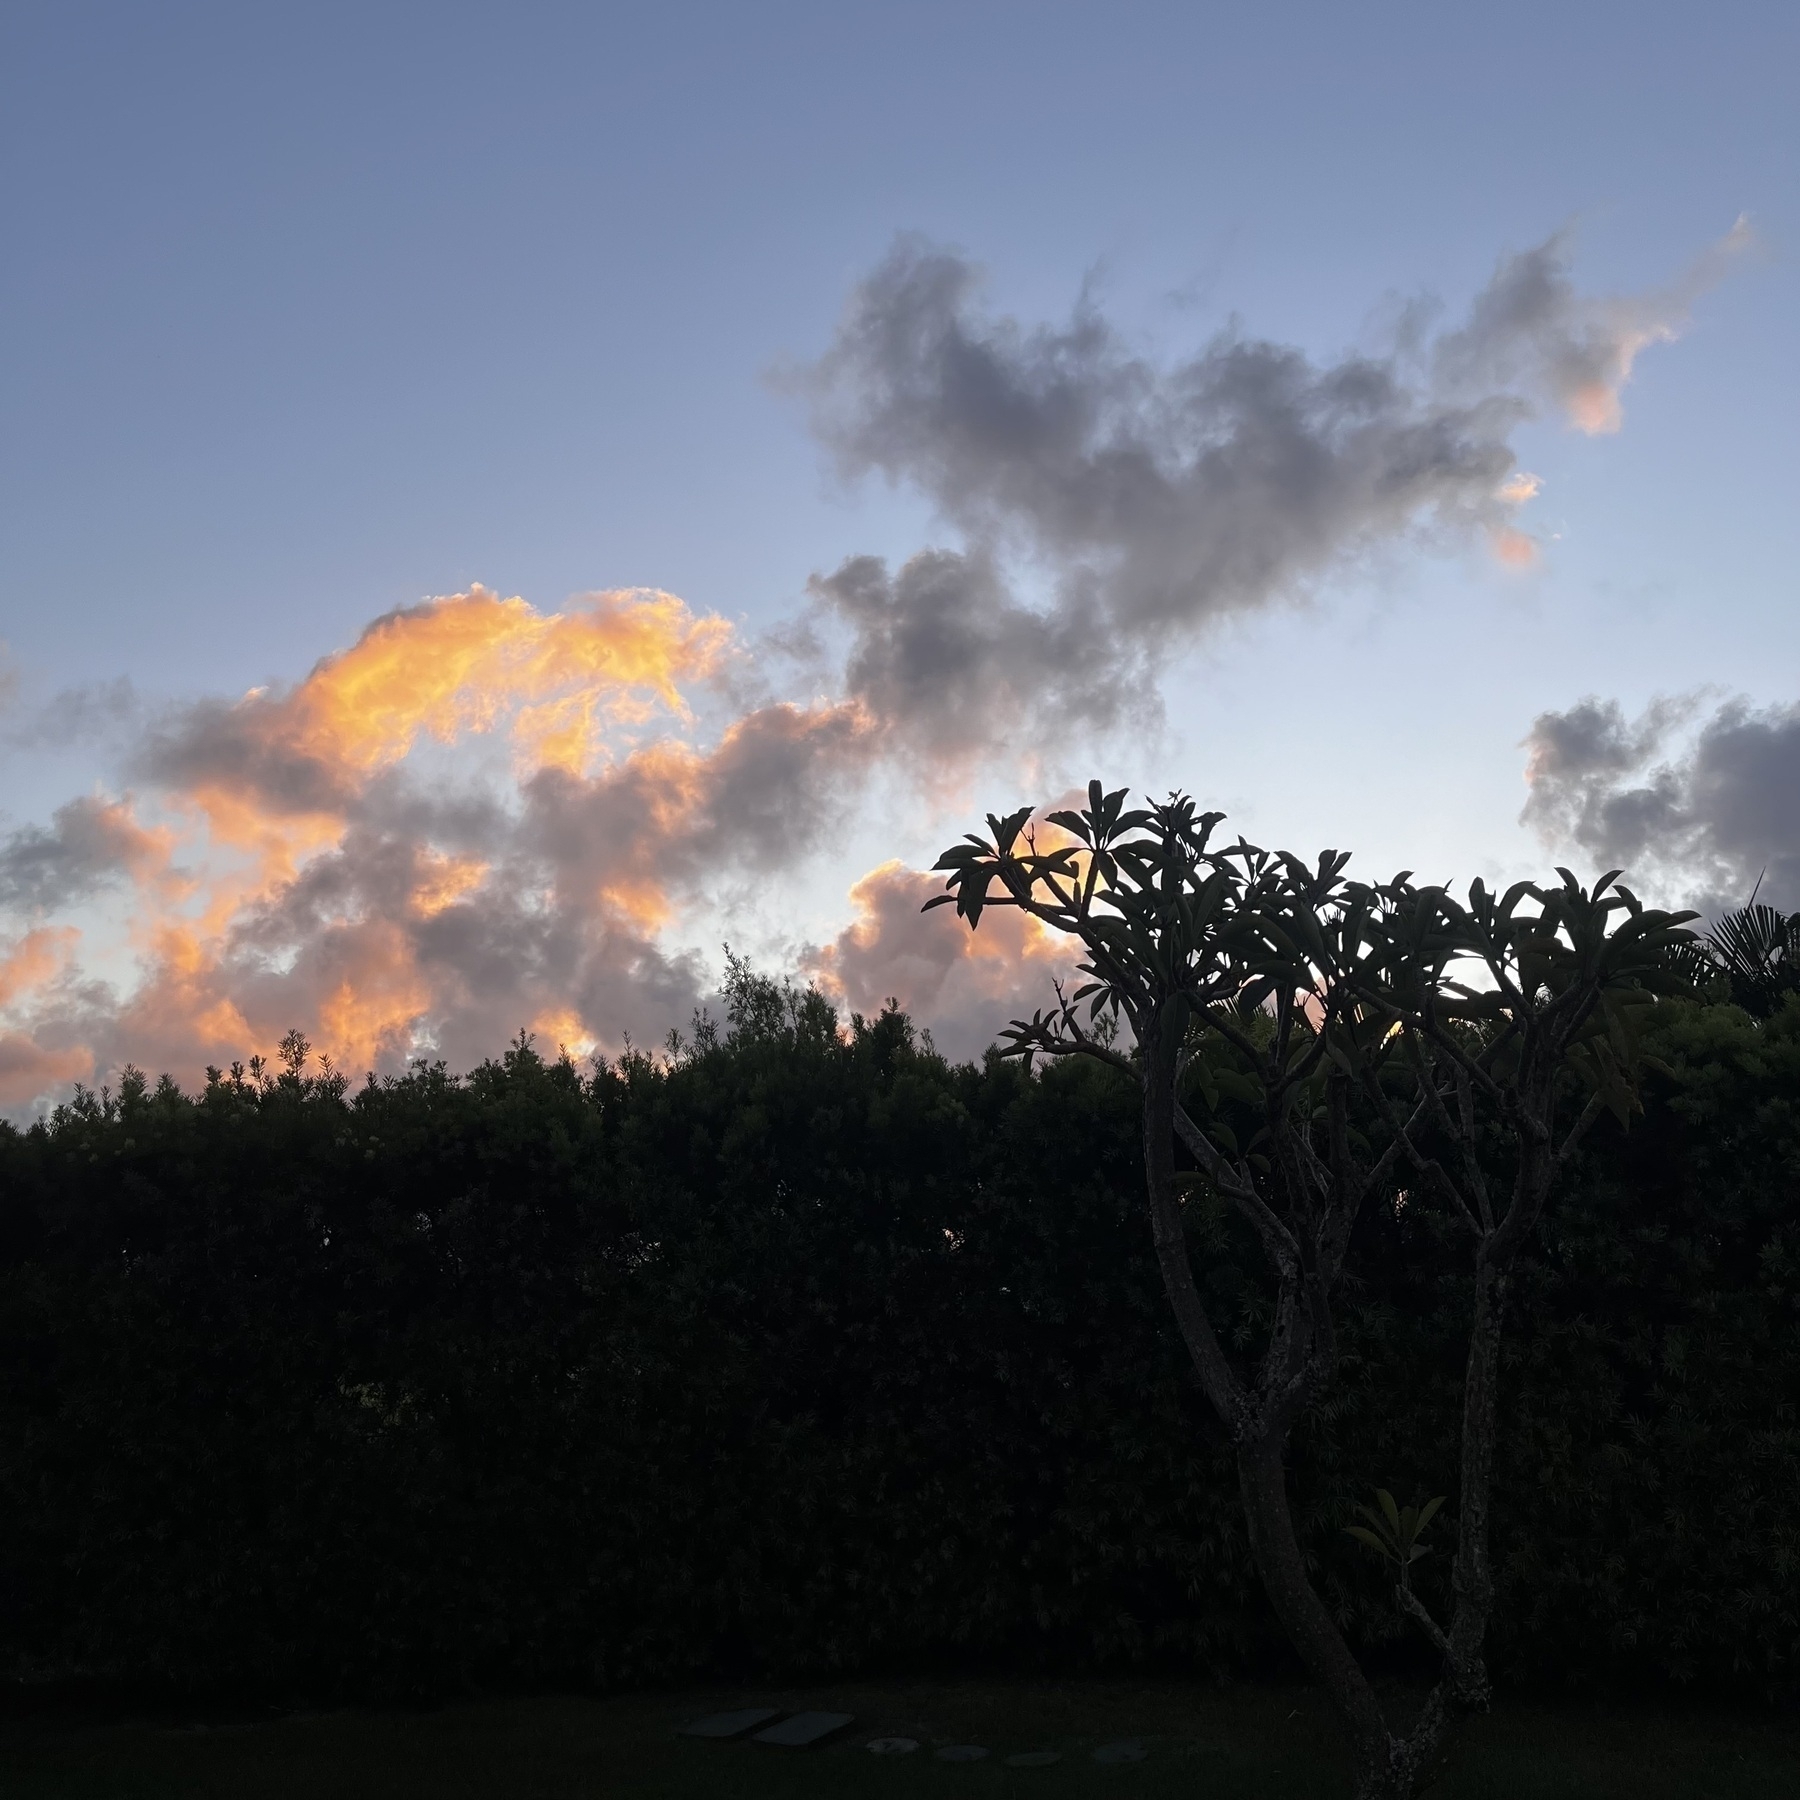 Blue sky and clouds capturing the orange light of a rising sun, above the silhouette of a long bush and tree